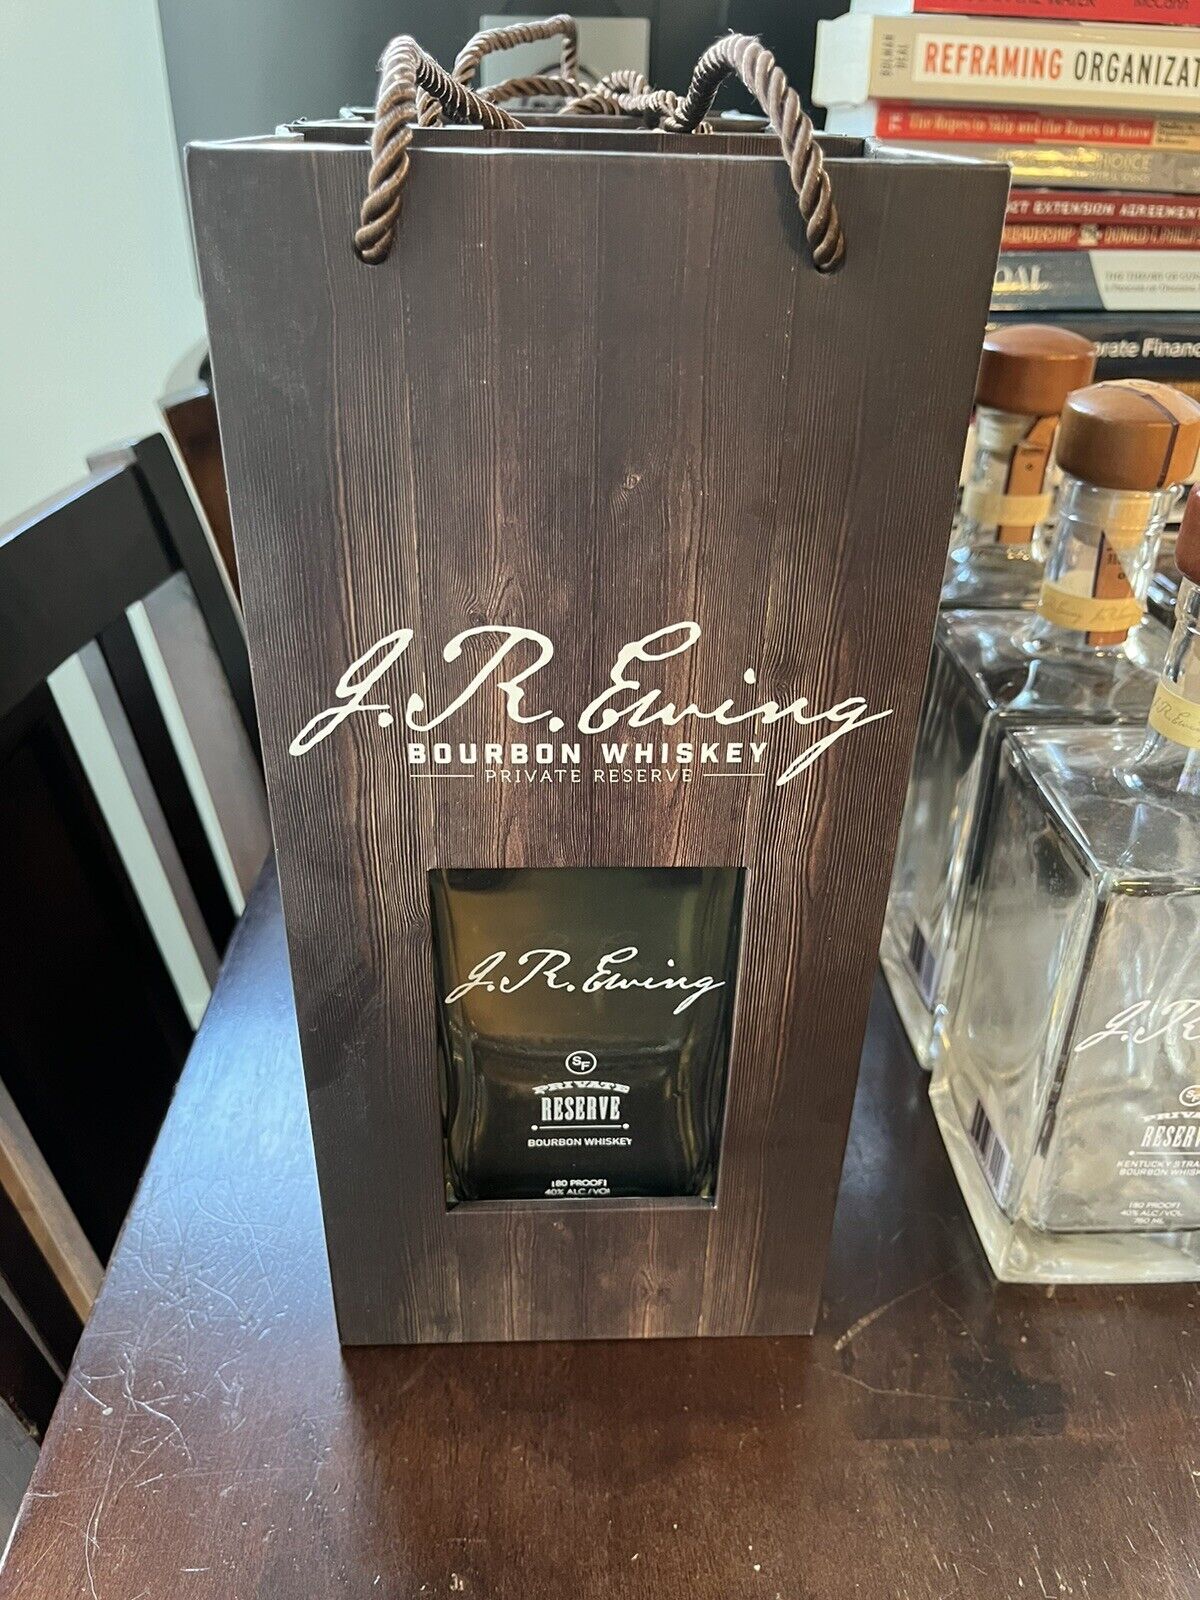 J.R. Ewing Private Reserve whiskey bottle with box